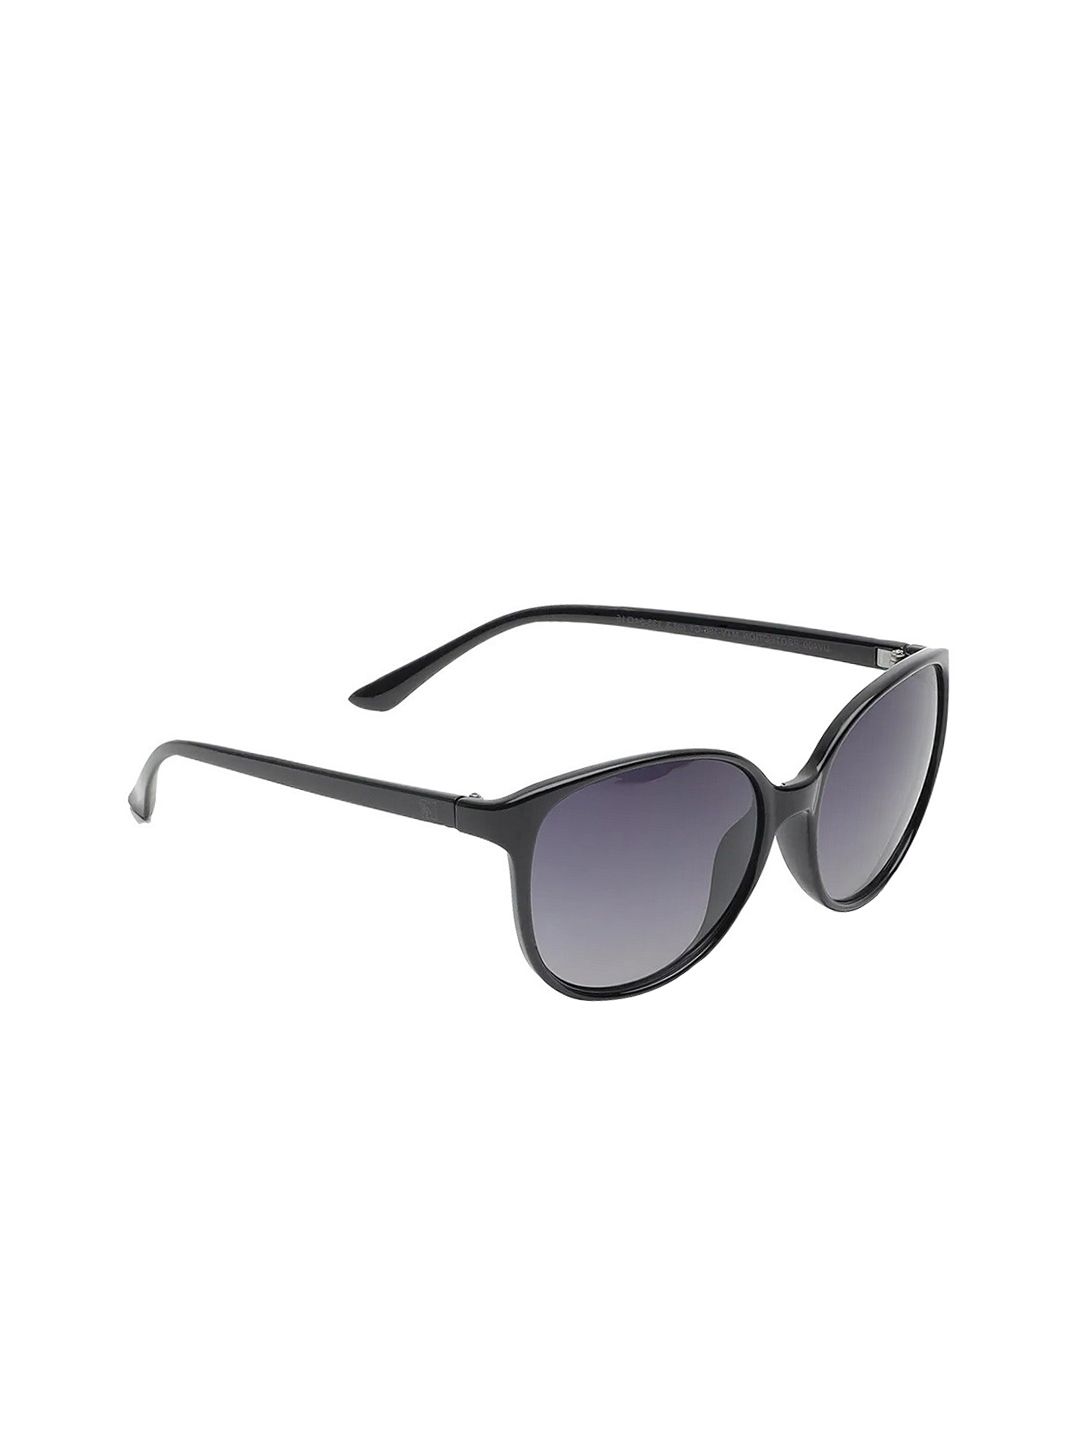 MTV Unisex Grey Lens & Black Square Sunglasses with UV Protected Lens Price in India